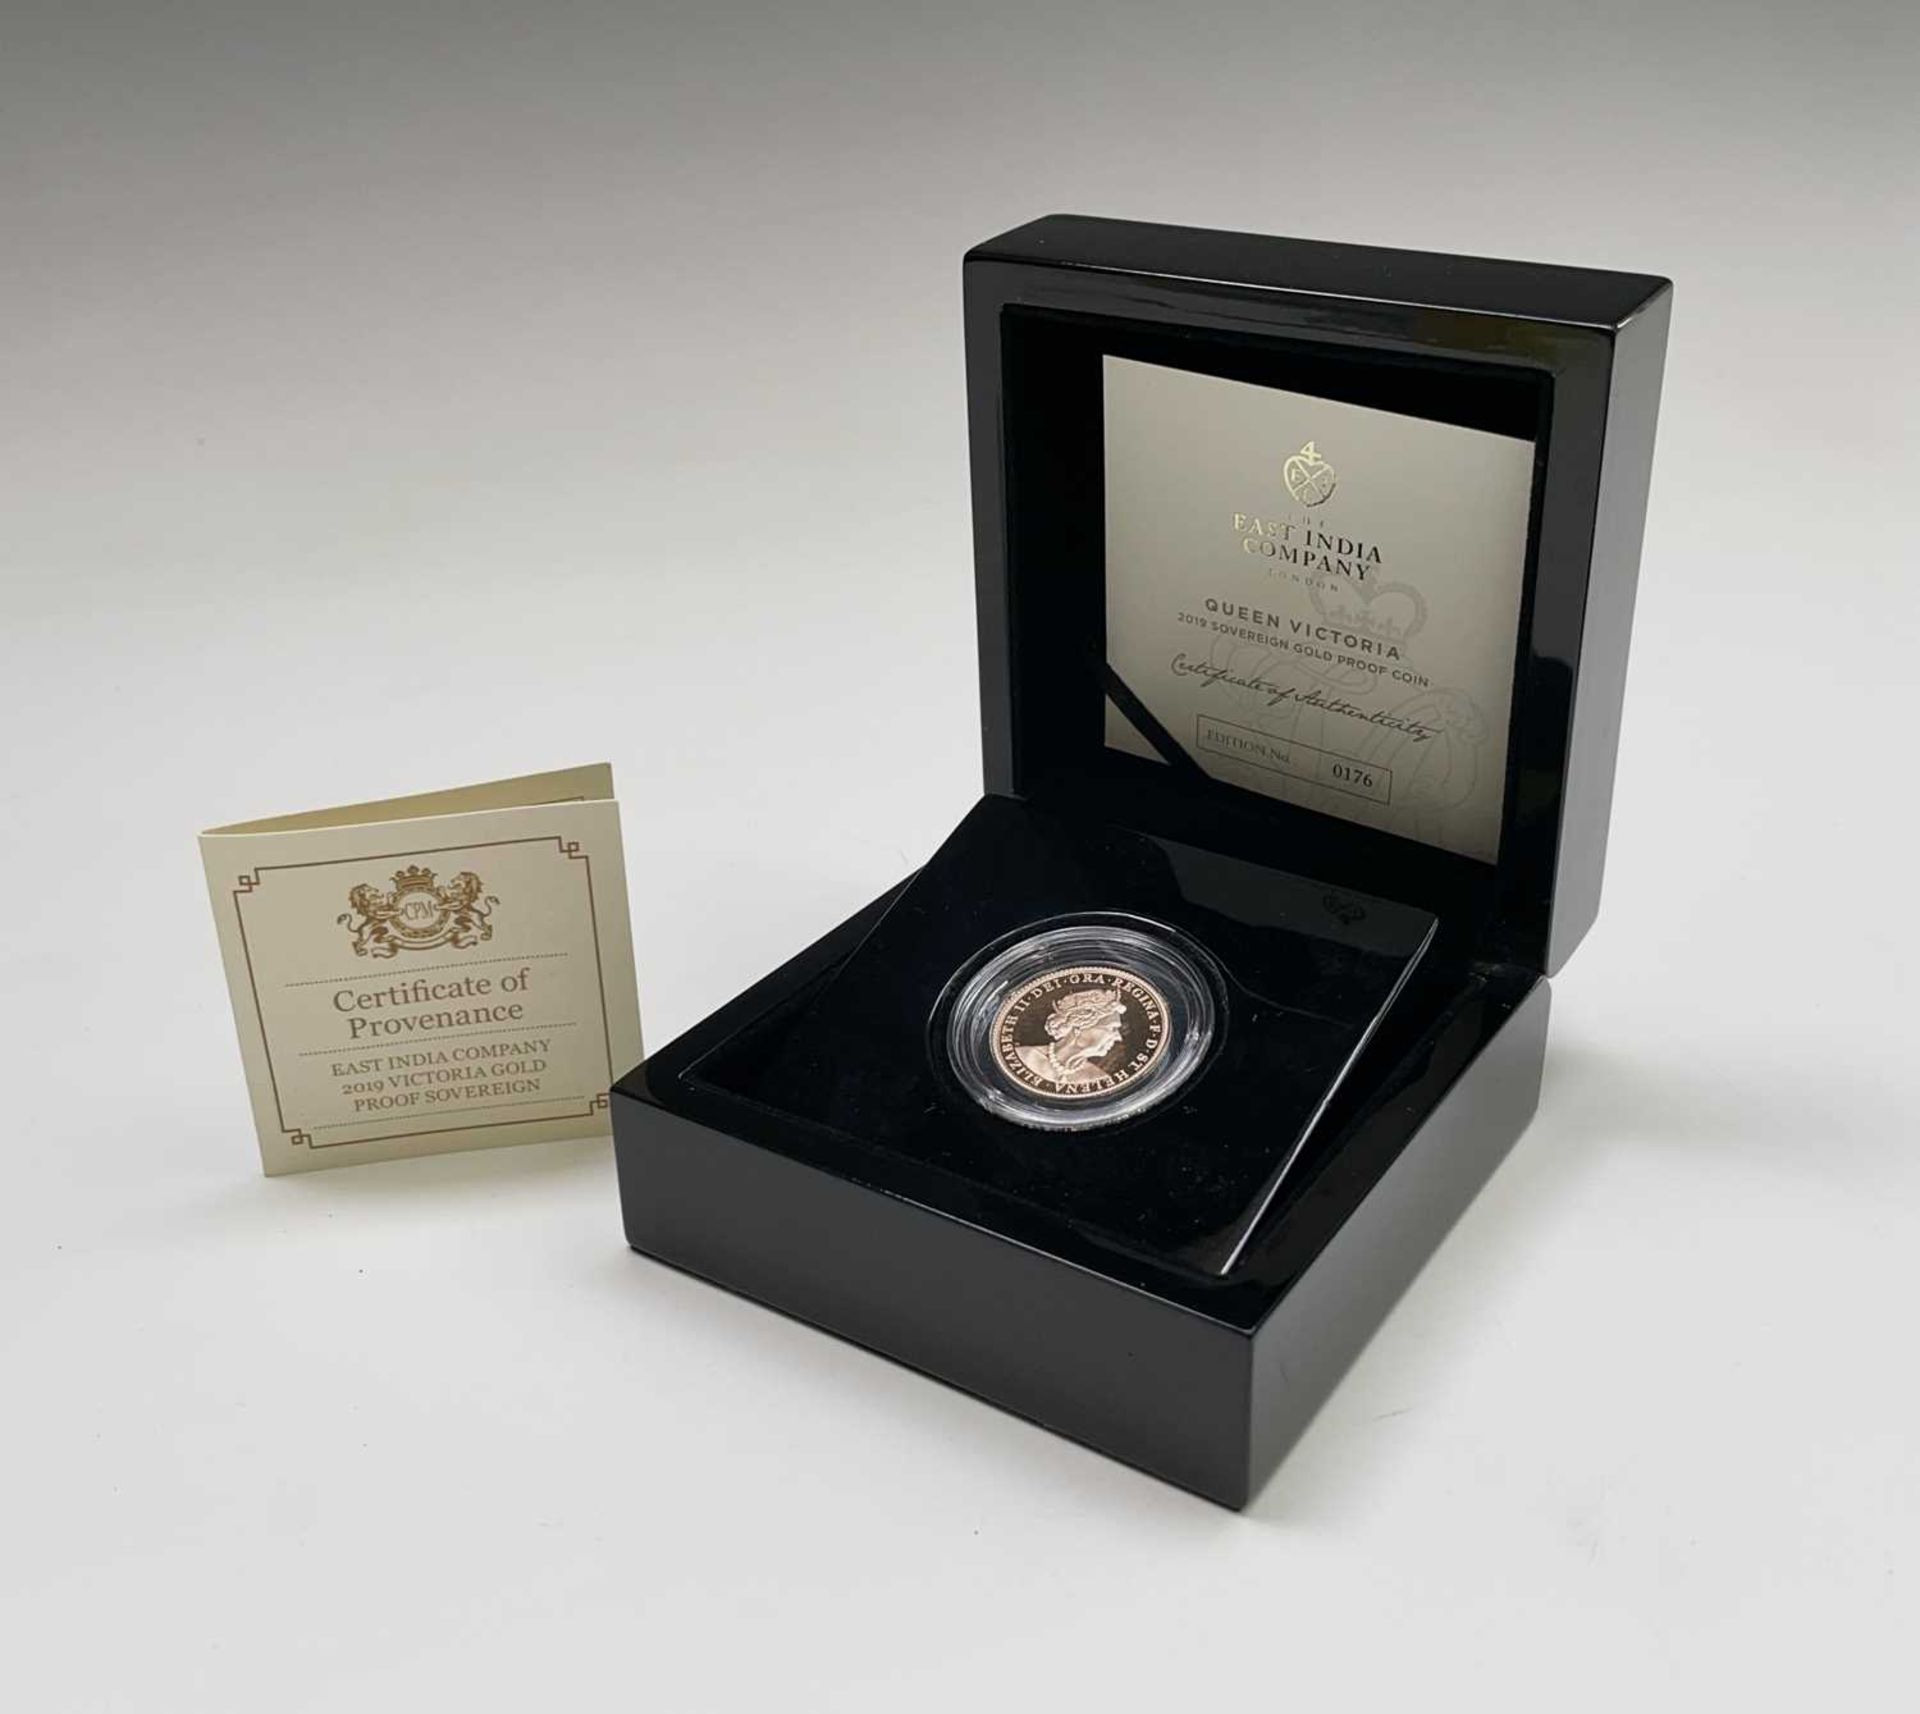 The East India Company. An unusual 2019 200th anniversary of Queen Victoria's birth issued by St - Image 3 of 7